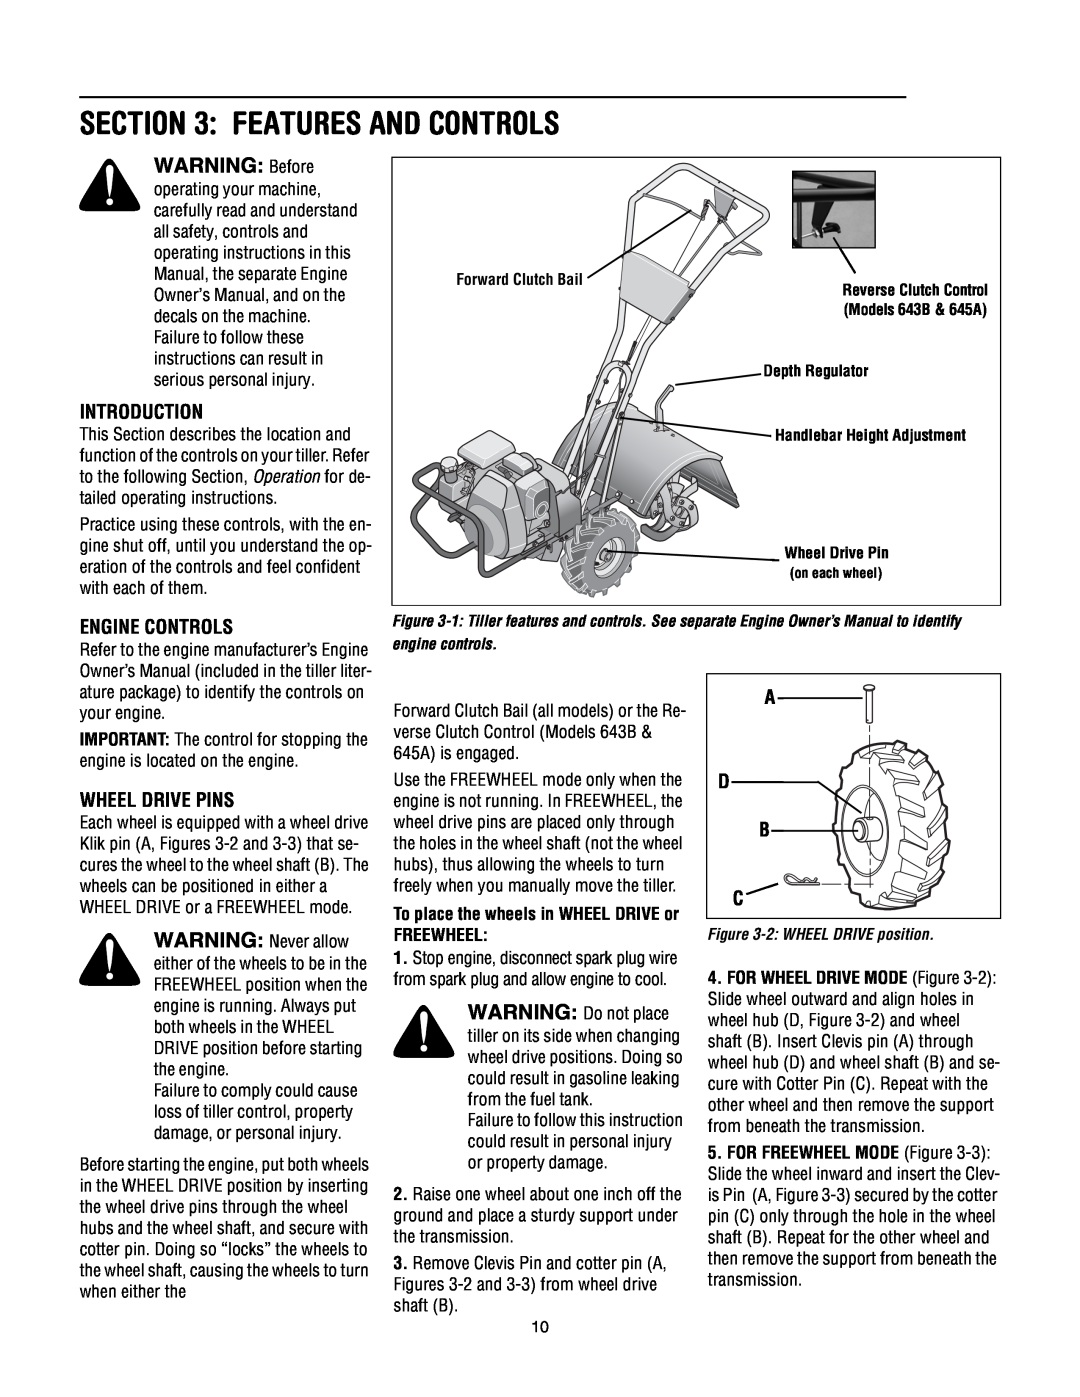 Troy-Bilt 643B Super Bronco manual Features And Controls, WARNING Before, Introduction, Engine Controls, Wheel Drive Pins 